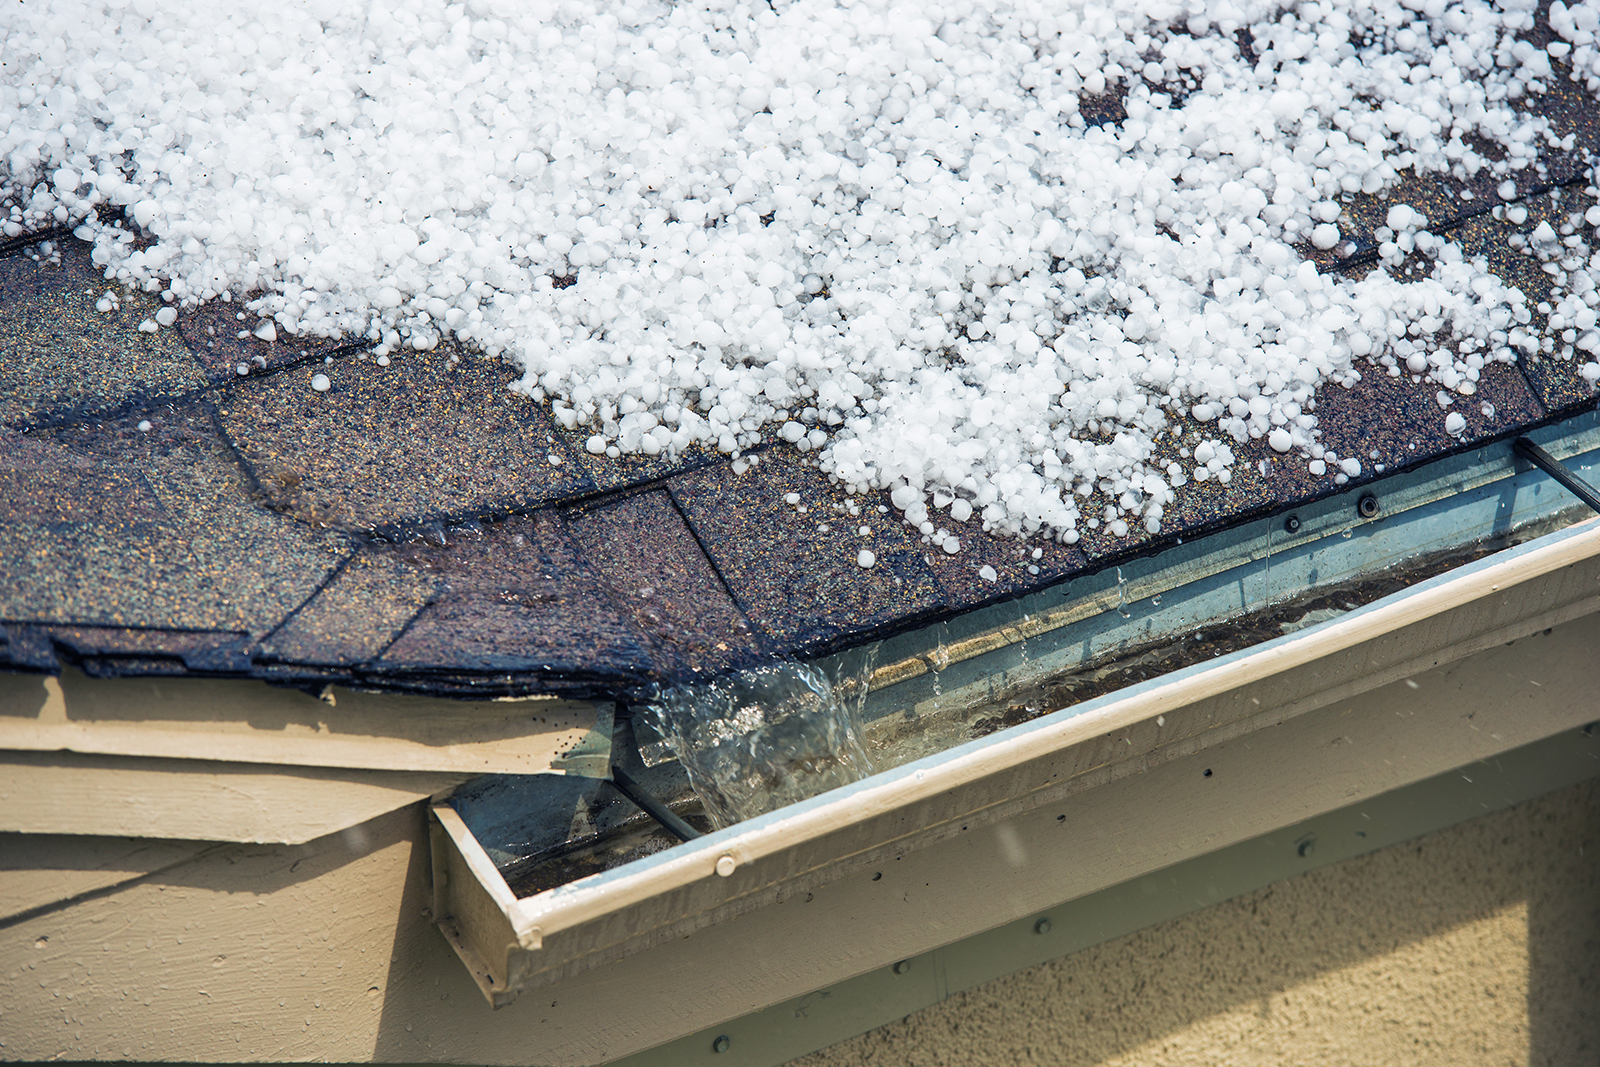 Hail damage on a roof